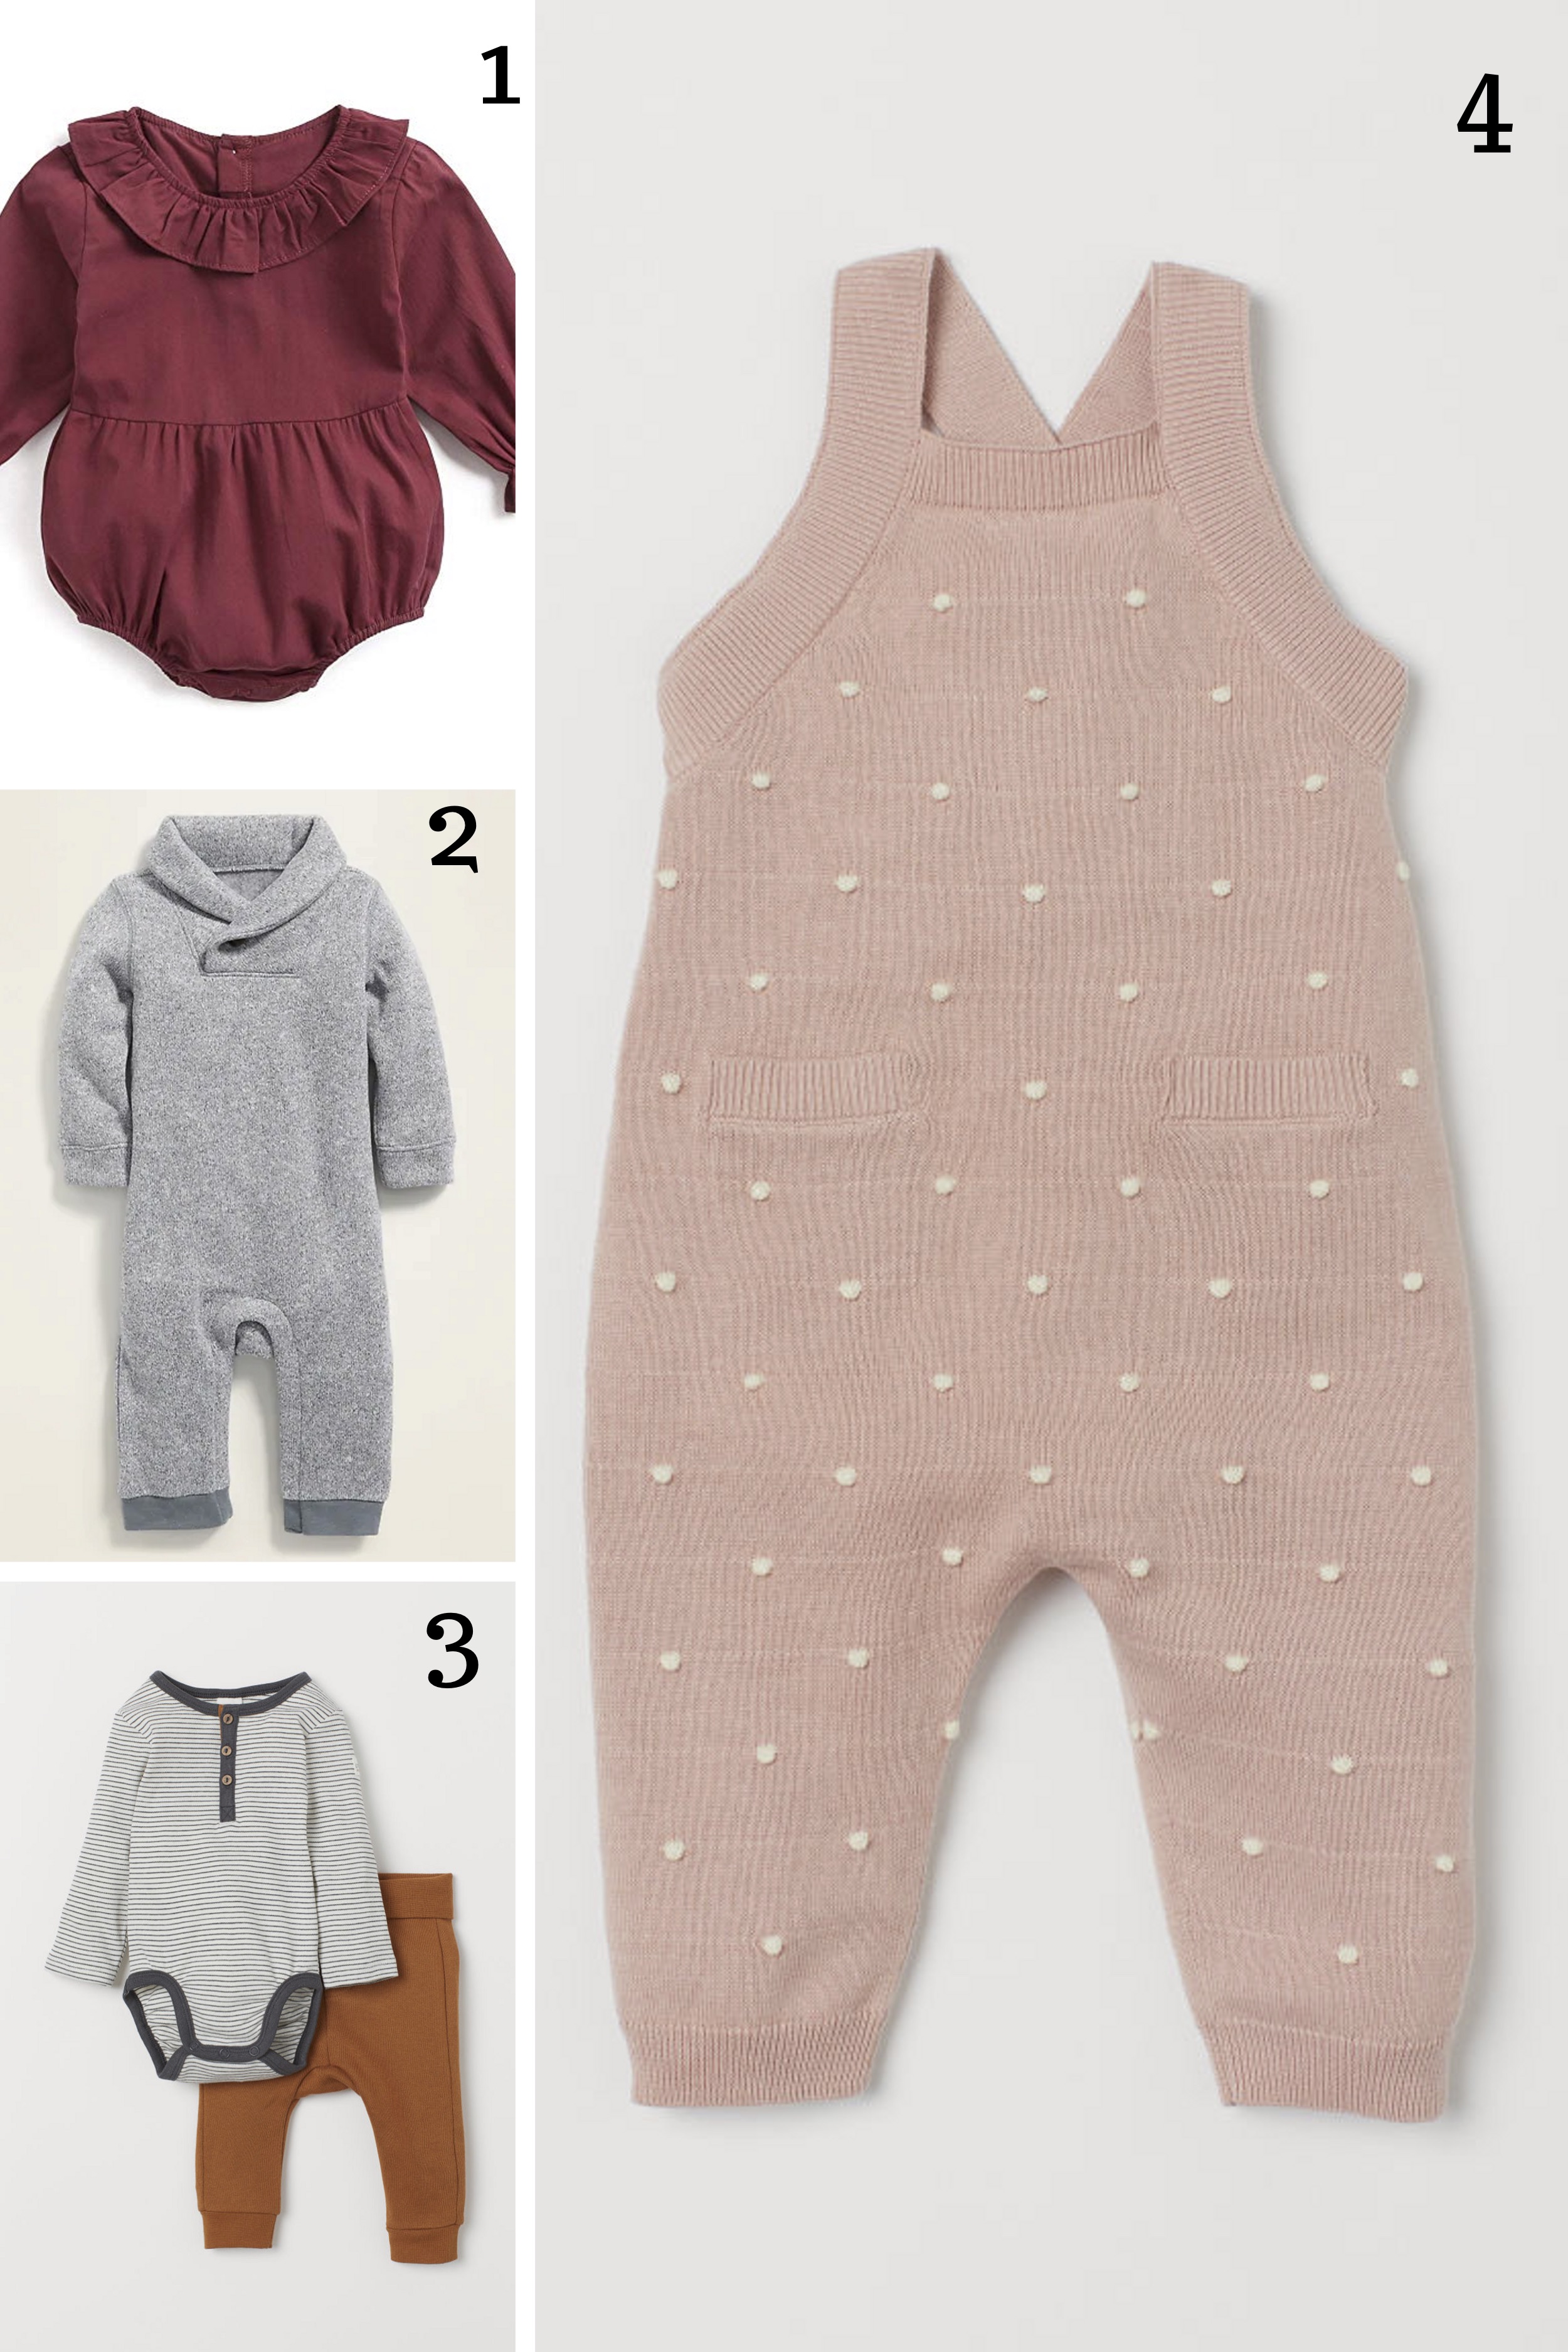 1. Ruffle romper || 2. Shawl collar one piece || 3. Body suit and pants || 4. Knit overalls